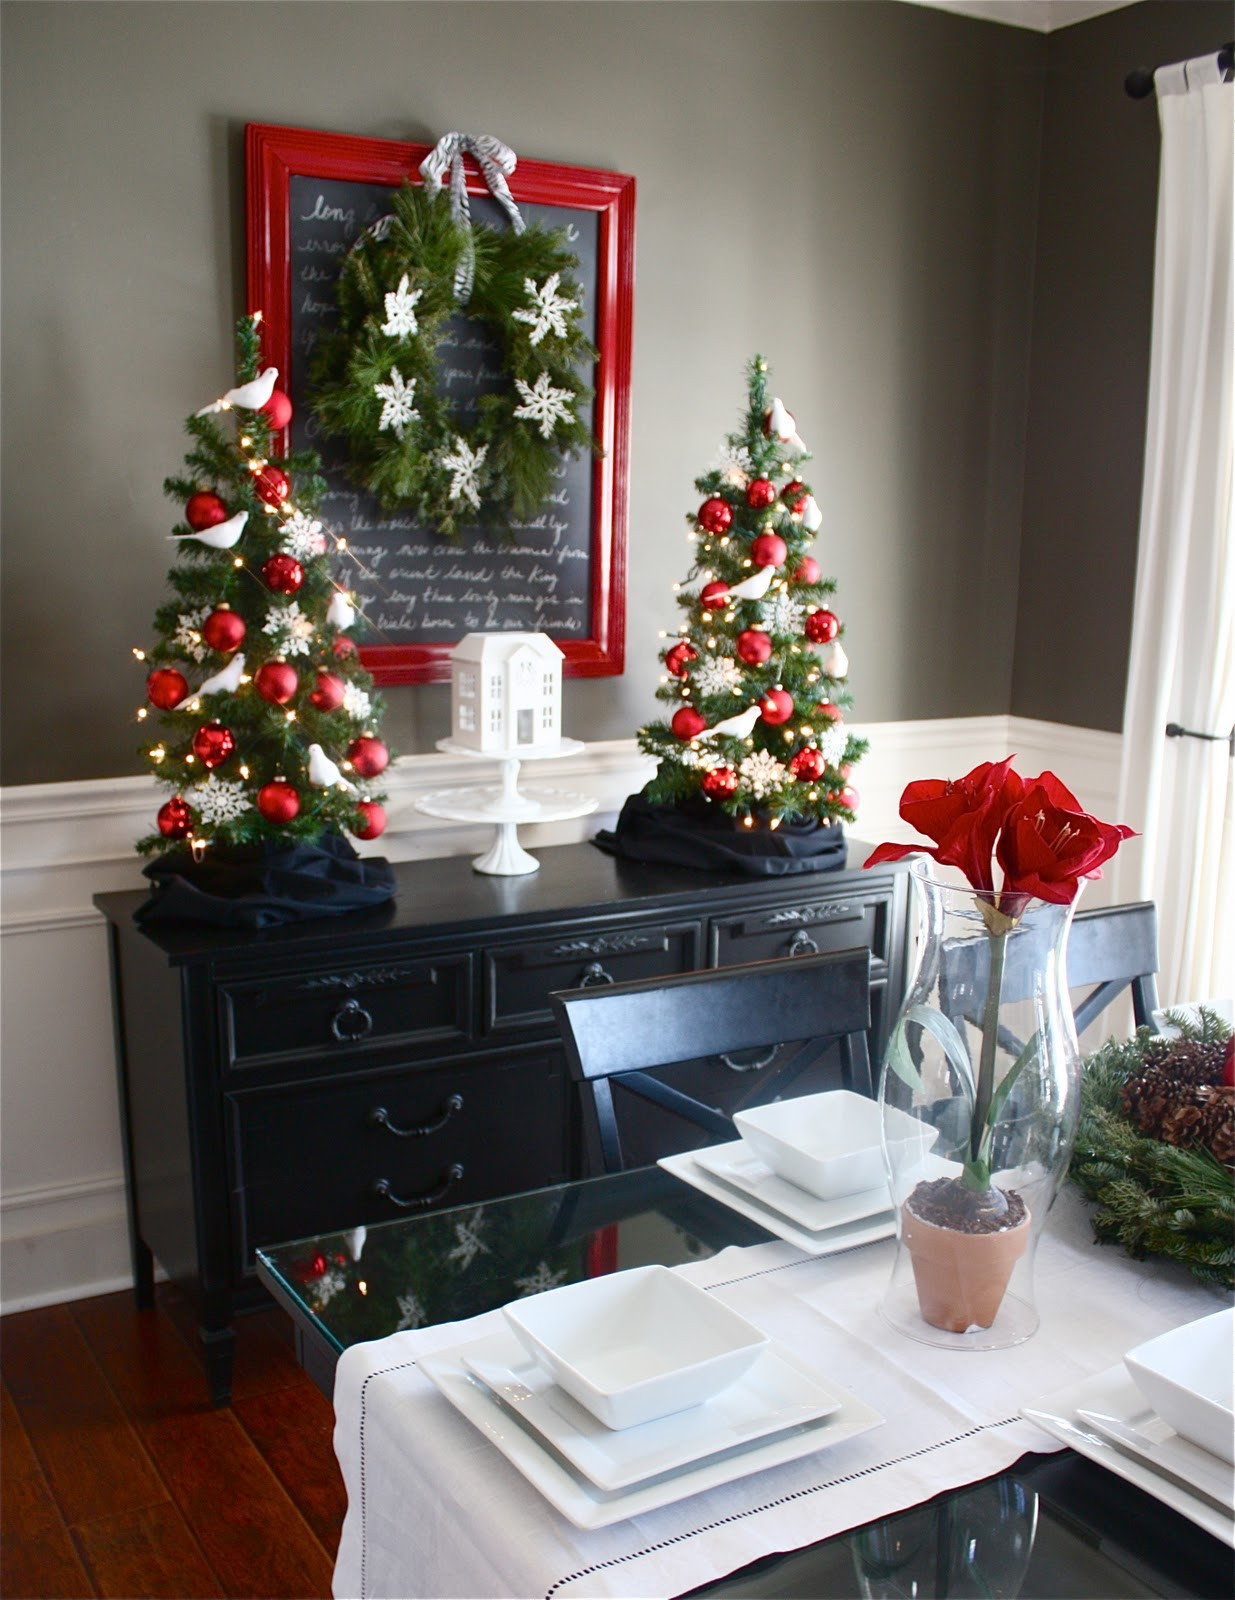 Dining Room Christmas Decor
 The Yellow Cape Cod Holiday Home Series Christmas Dining